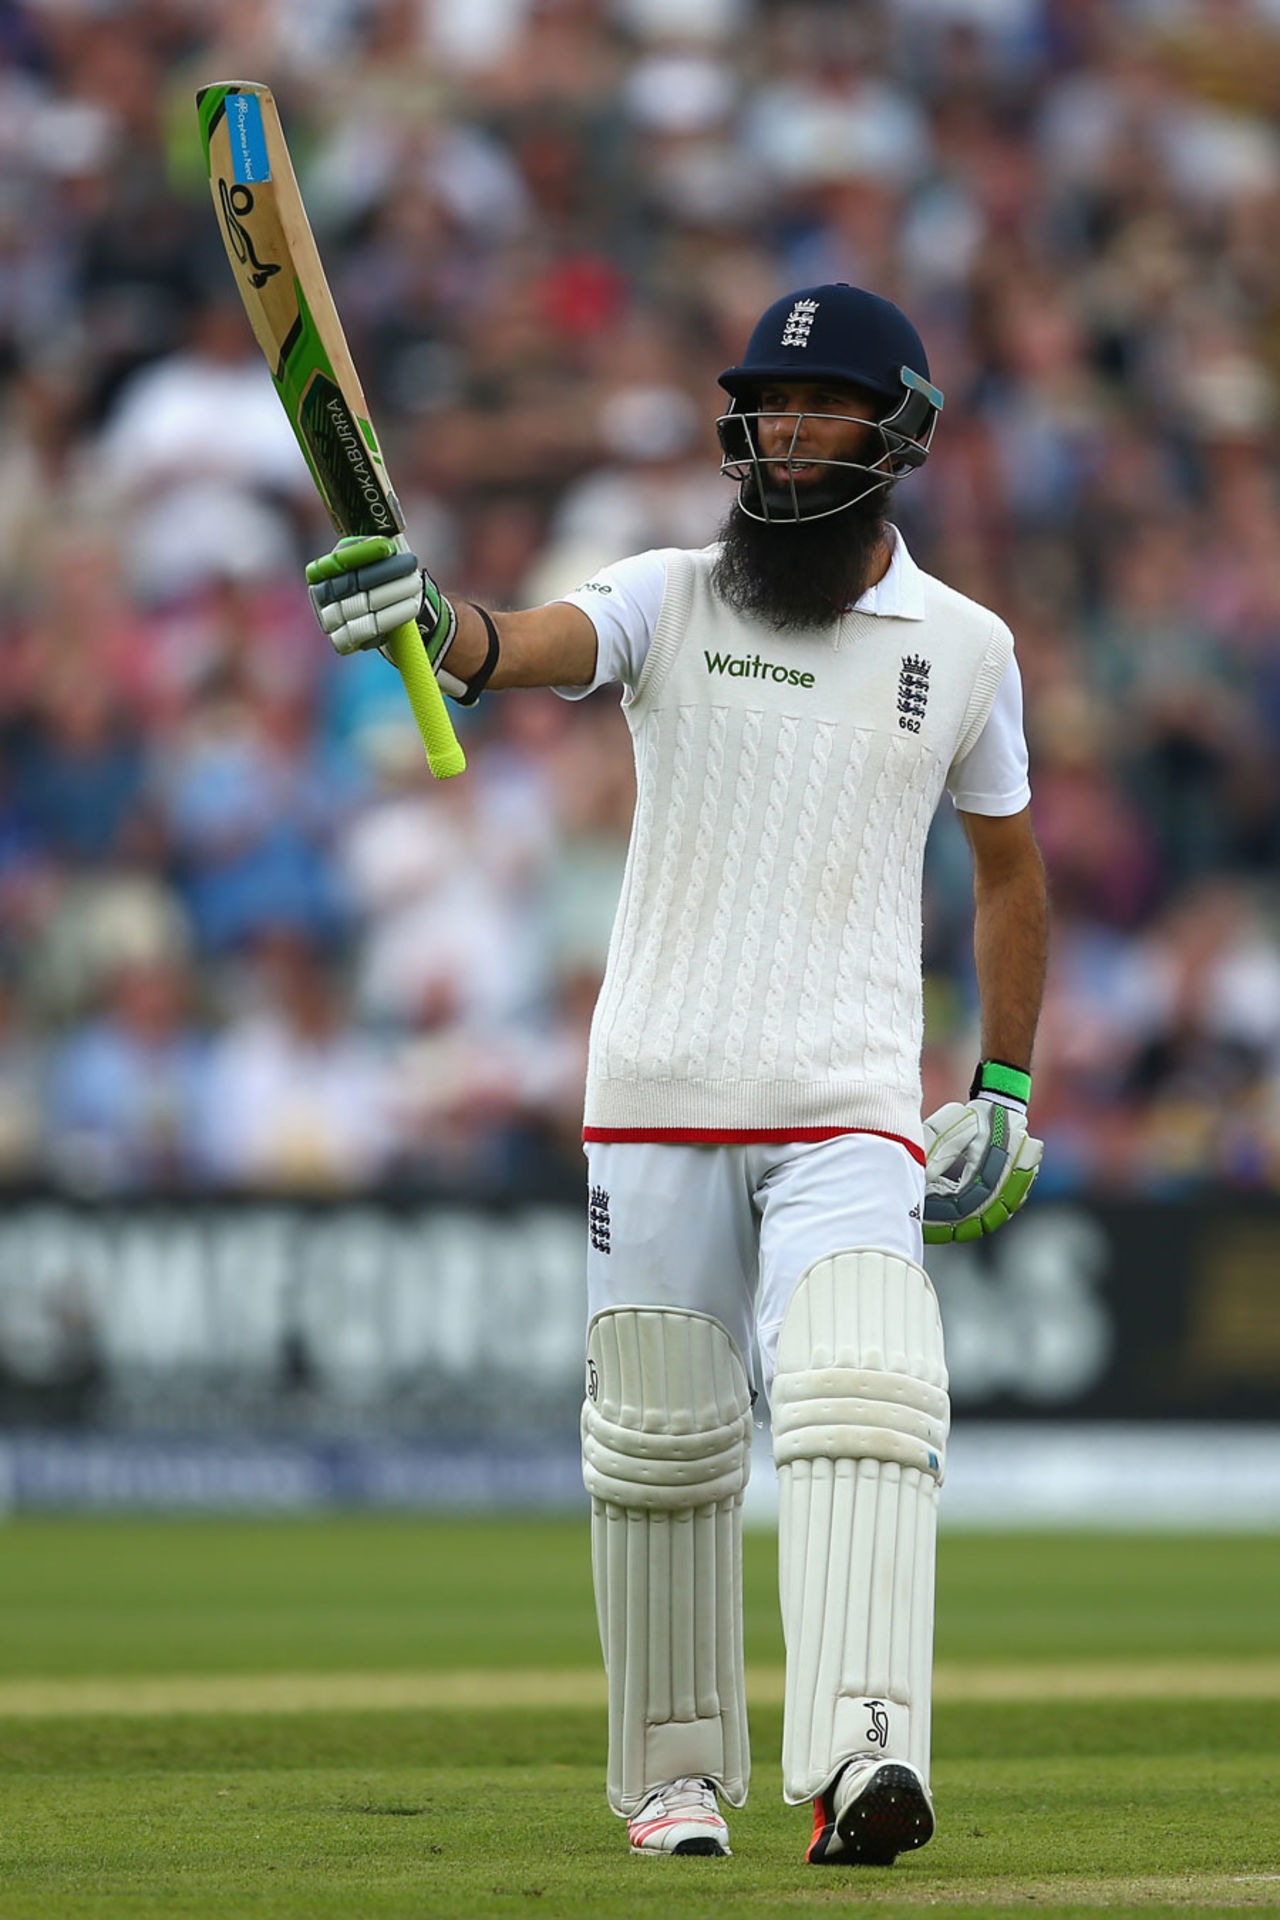 Moeen Ali's fifty carried England to a first-innings total of 281, England v Australia, 3rd Test, Edgbaston, 2nd day, July 30, 2015